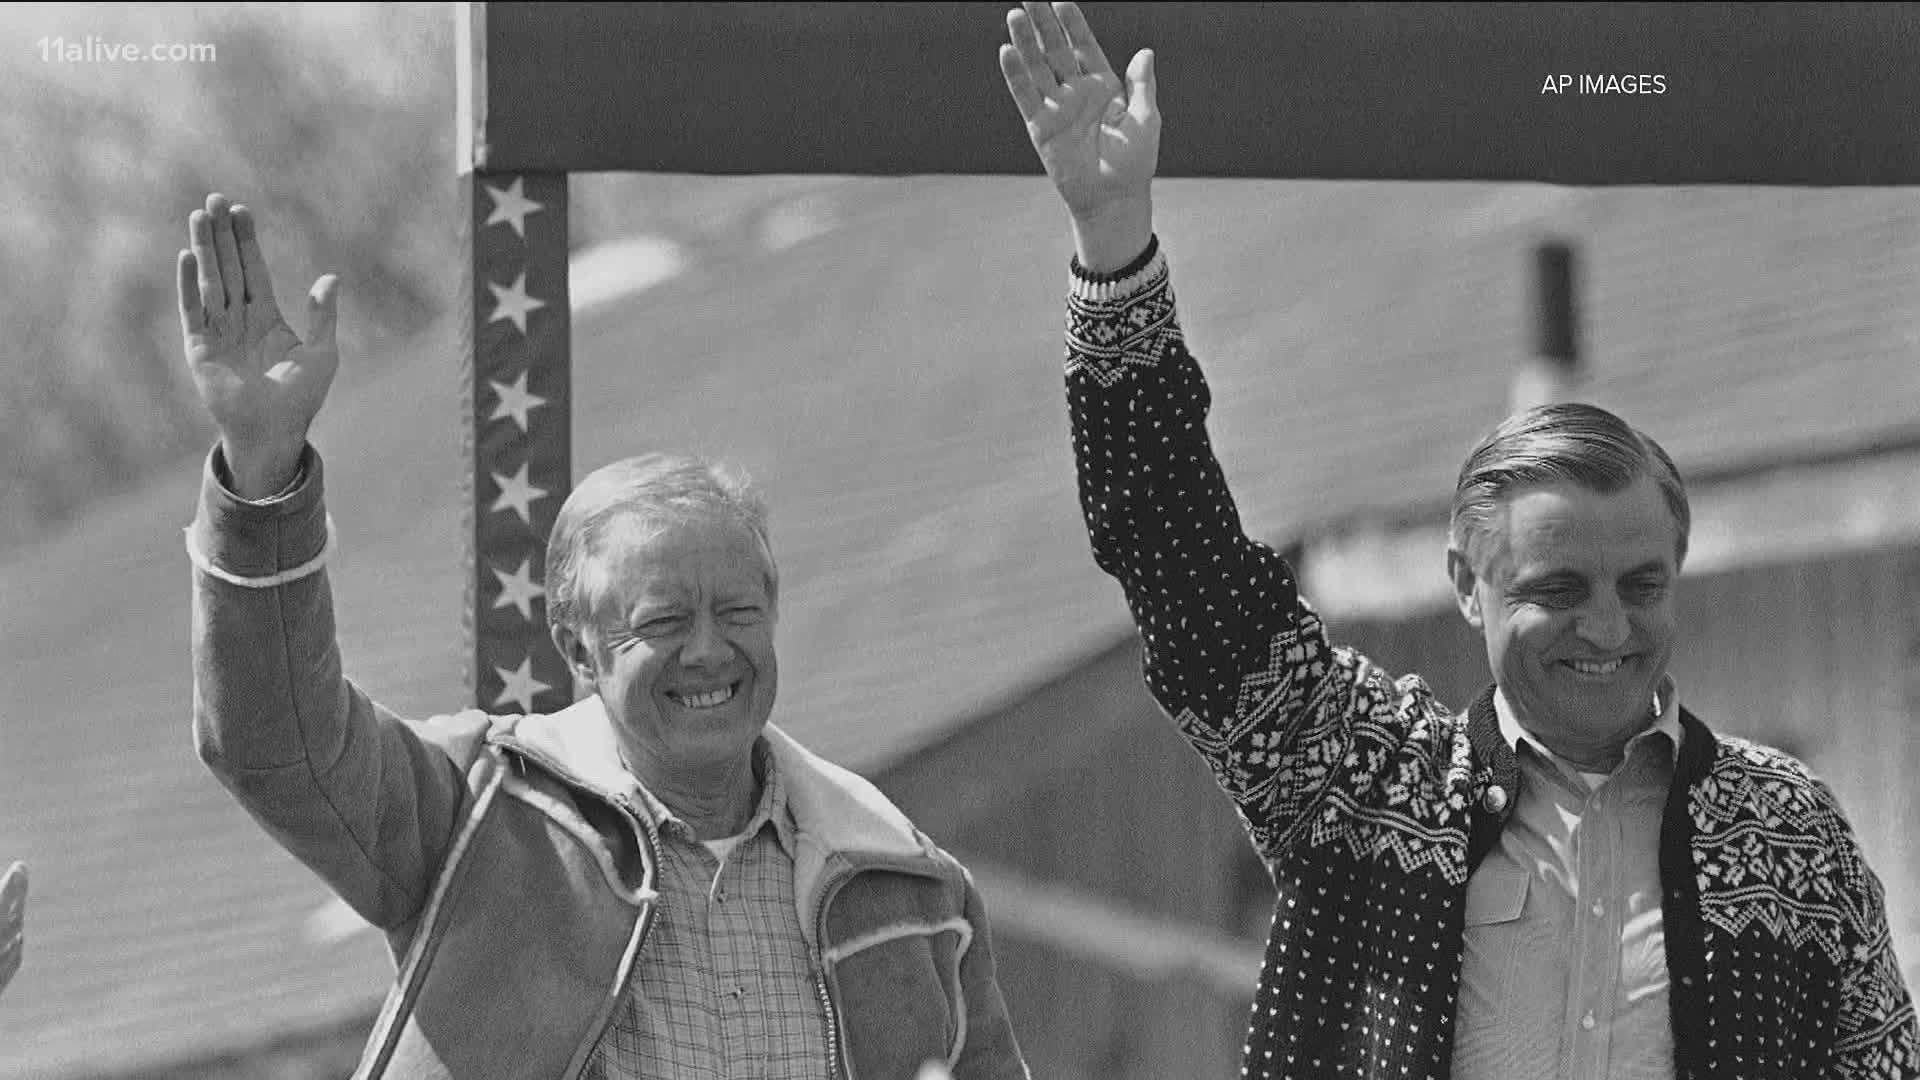 Mondale, who served as vice president under Jimmy Carter and was the 1984 Democratic presidential nominee, died Monday at the age of 93.